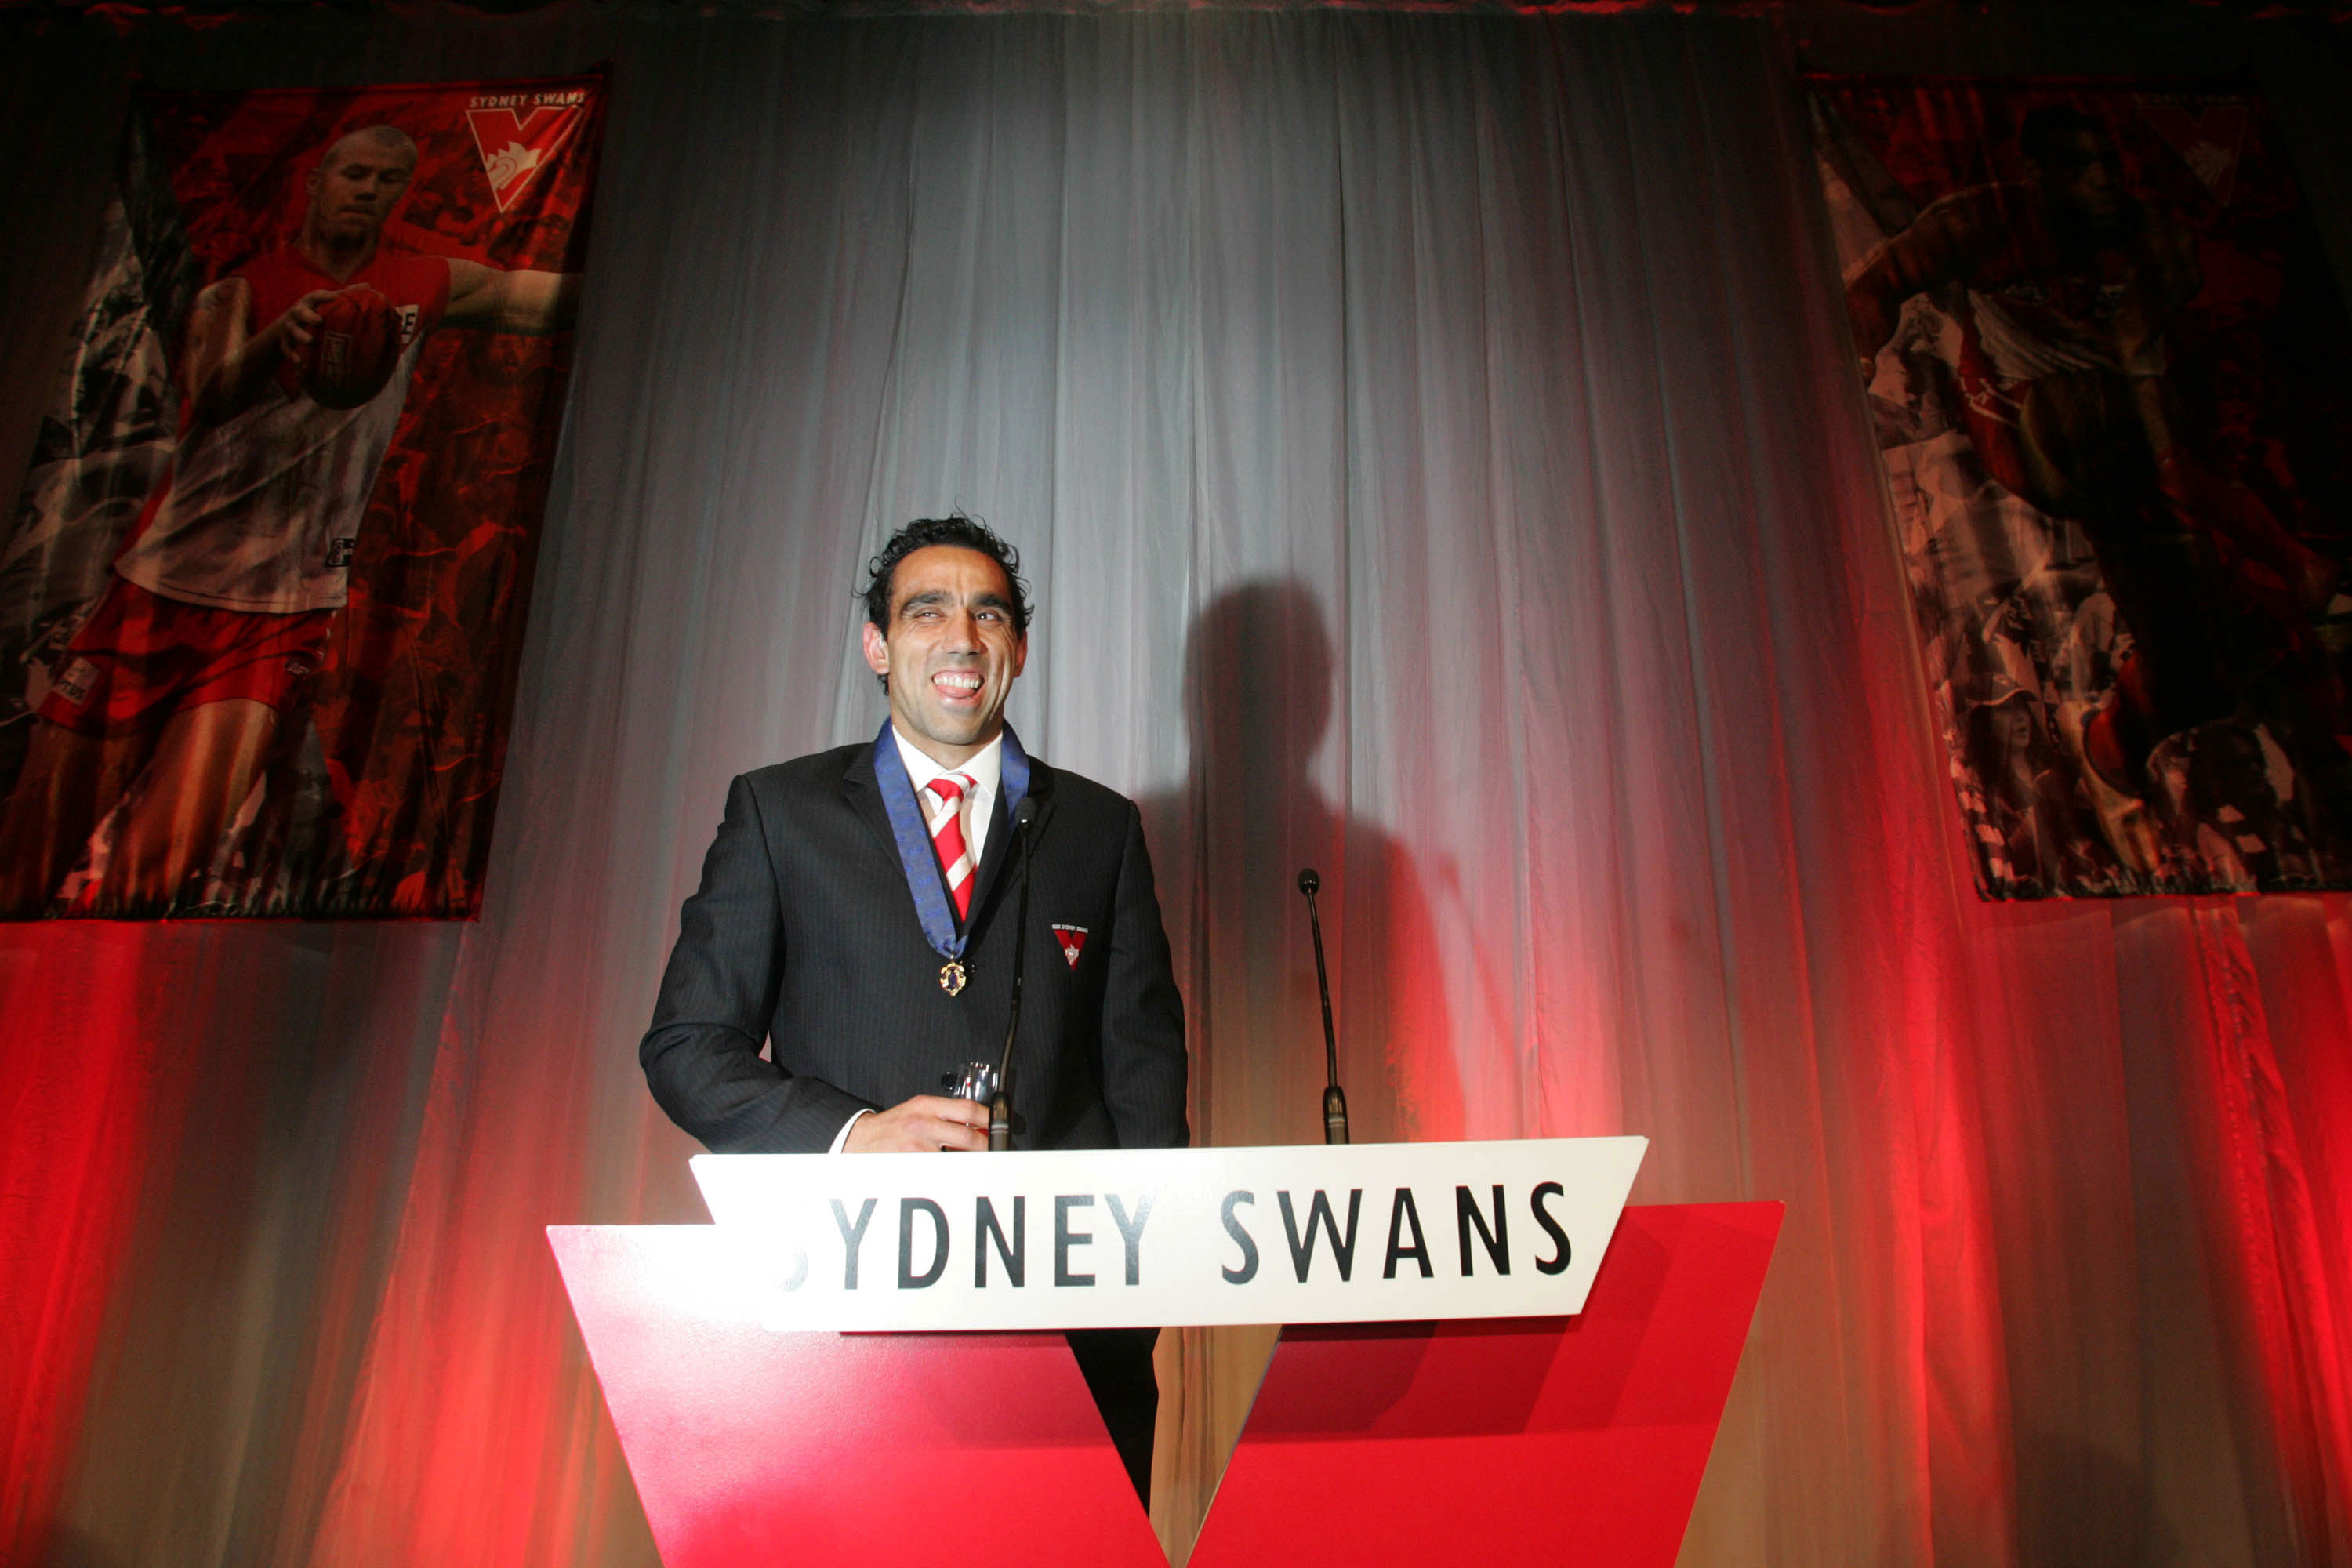 Adam Goodes wins the 2006 Brownlow medal.